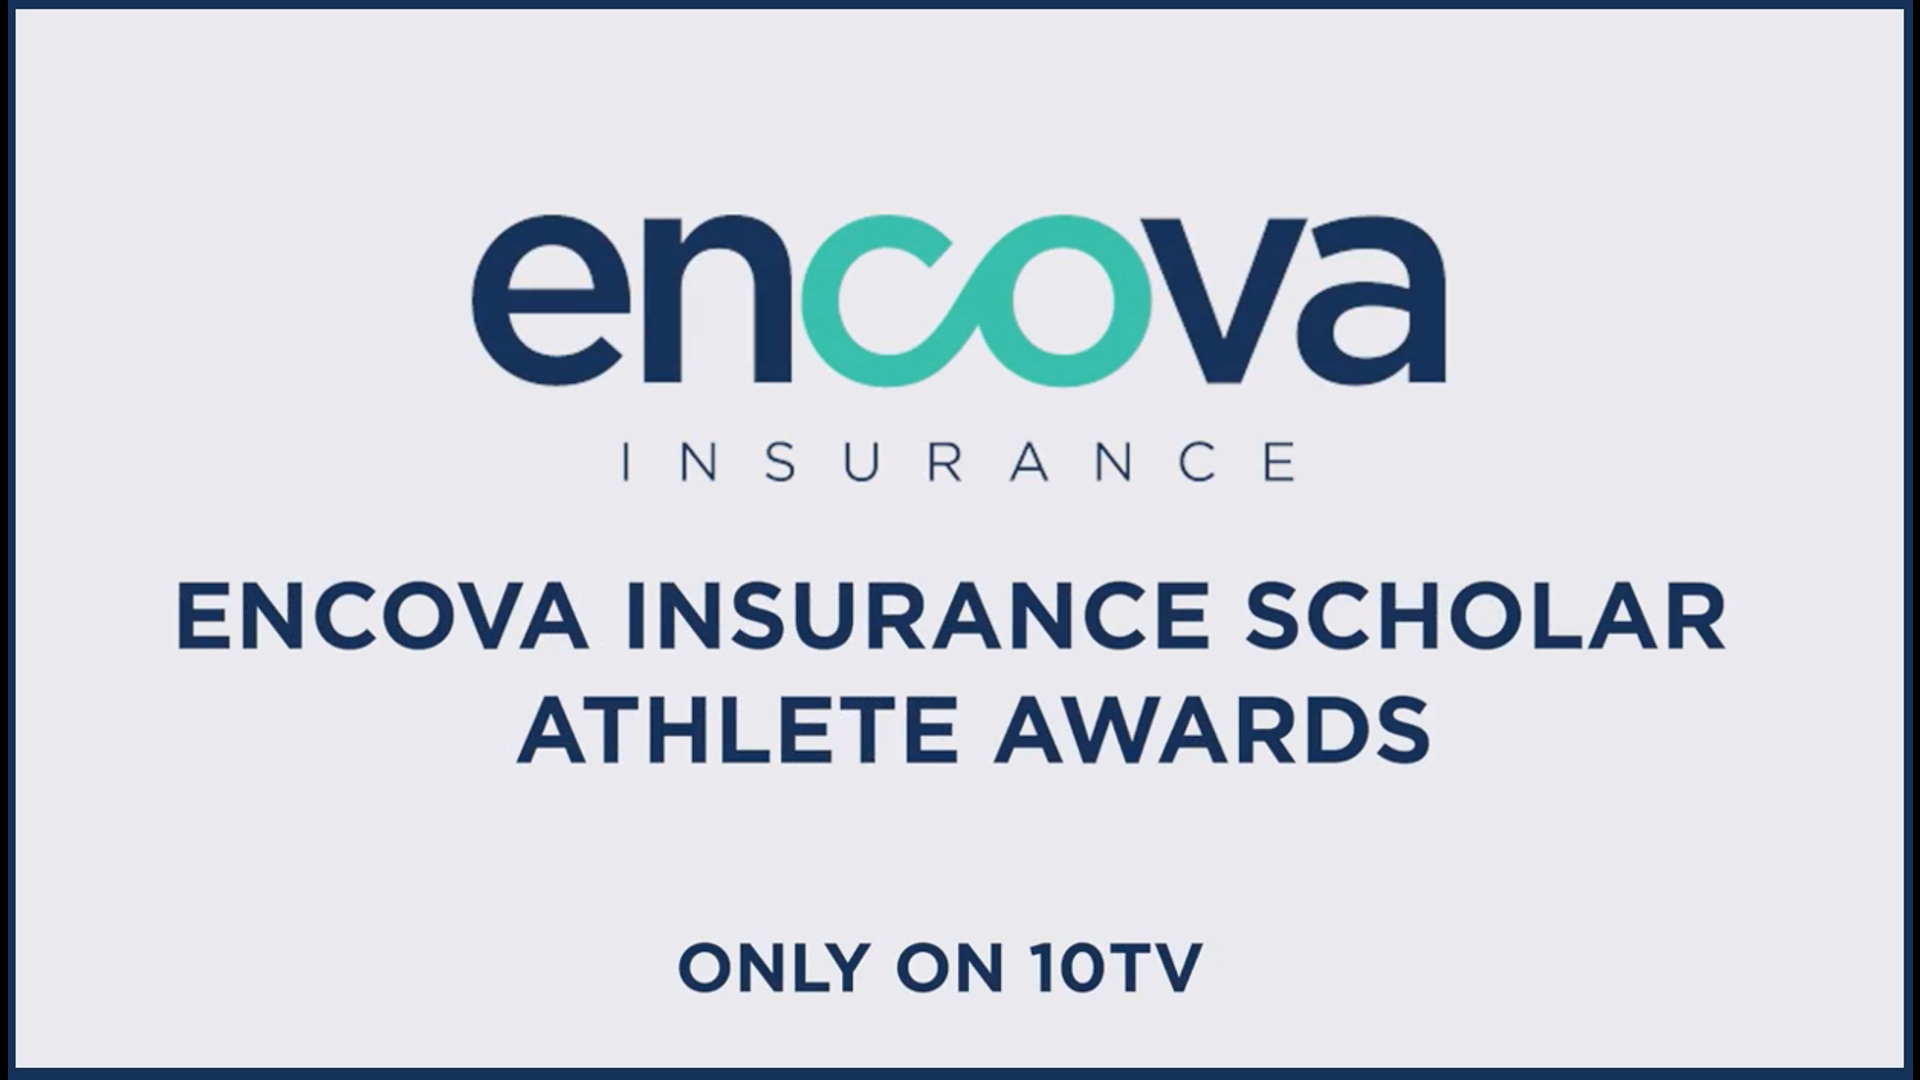 Igwebuike received a $10,000 scholarship from Encova Insurance based on his community involvement, academic and athletic achievements.